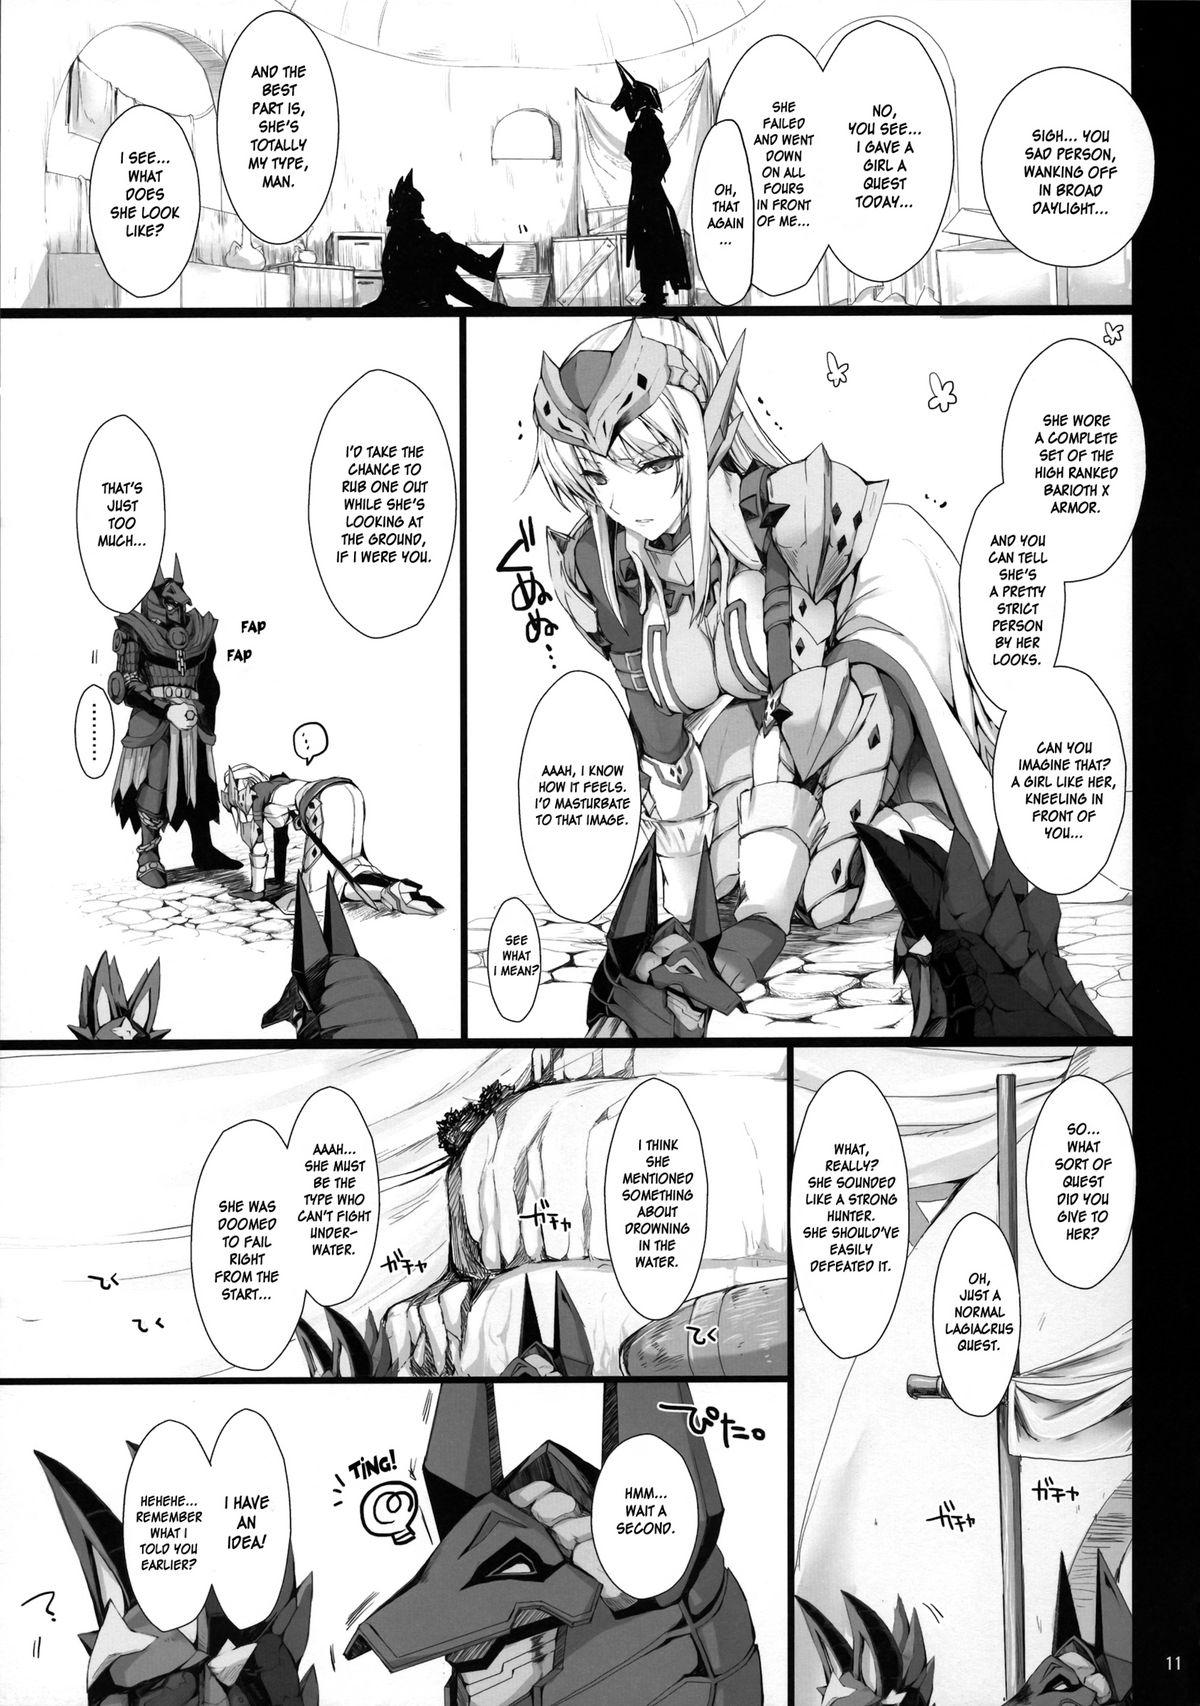 Pussy Lick Monhan no Erohon 12 - Monster hunter Female Domination - Page 11